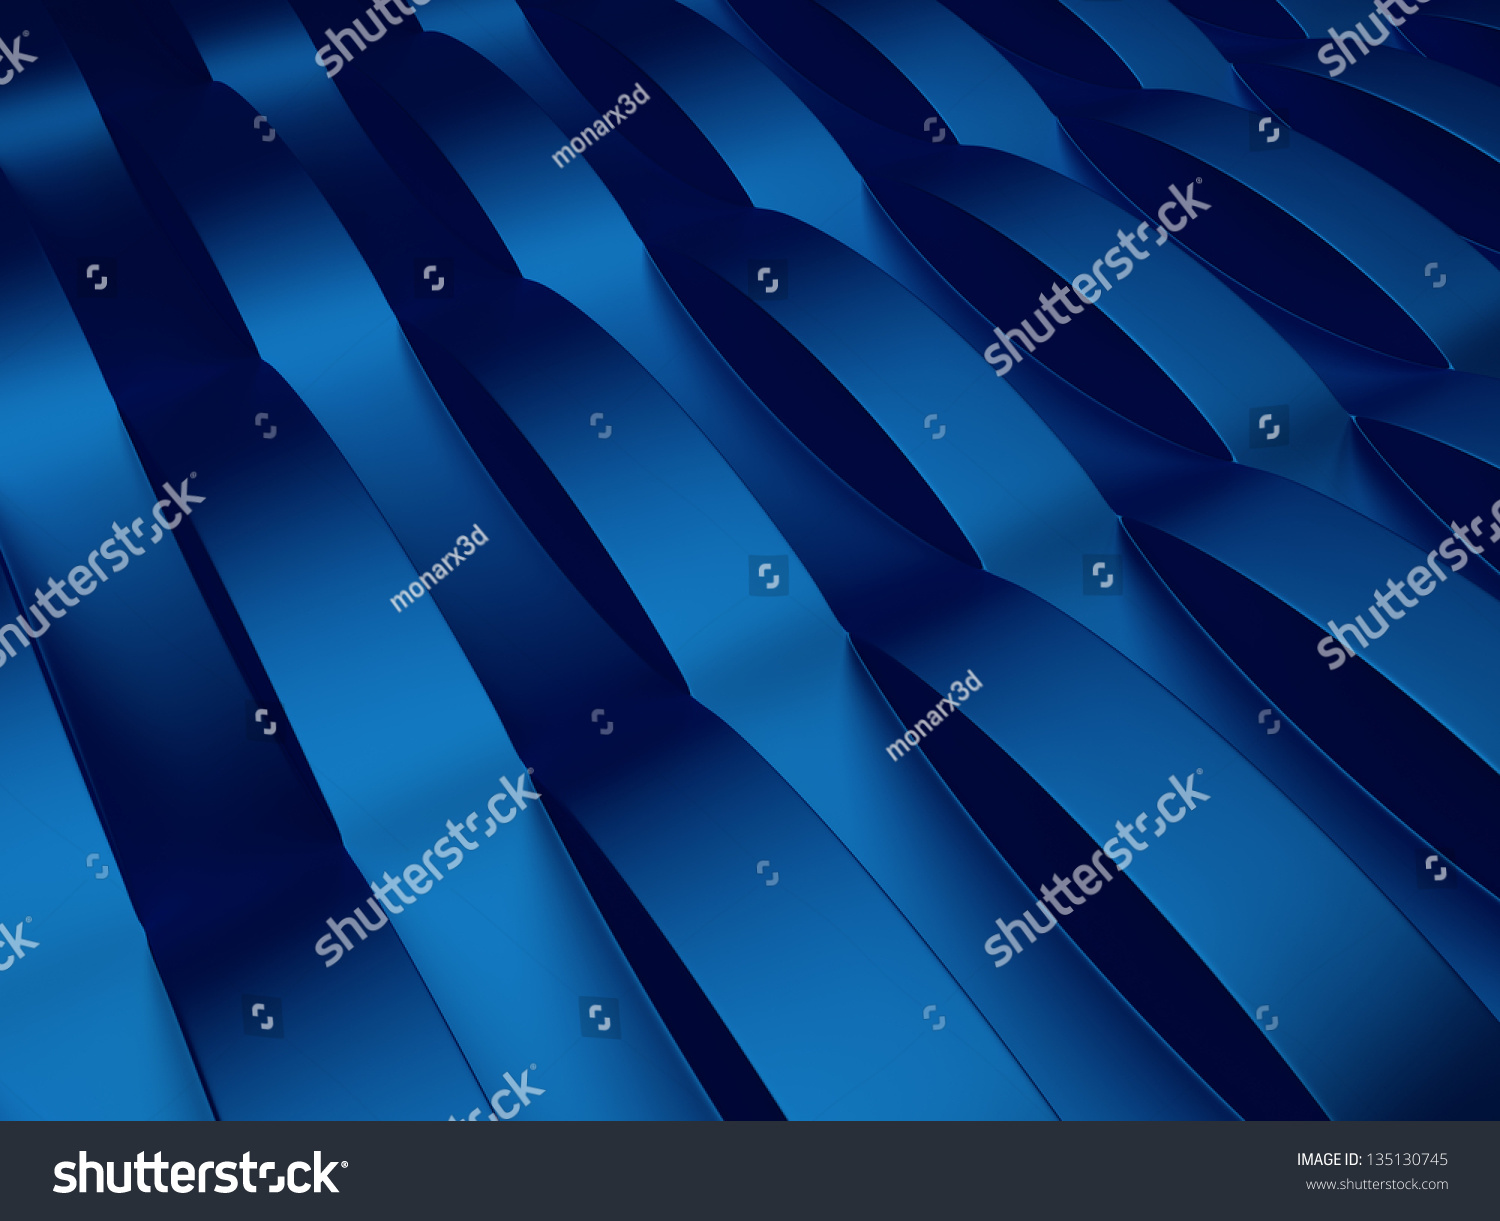 Blue Industrial Metallic Background With Round Elements Stock Photo ...